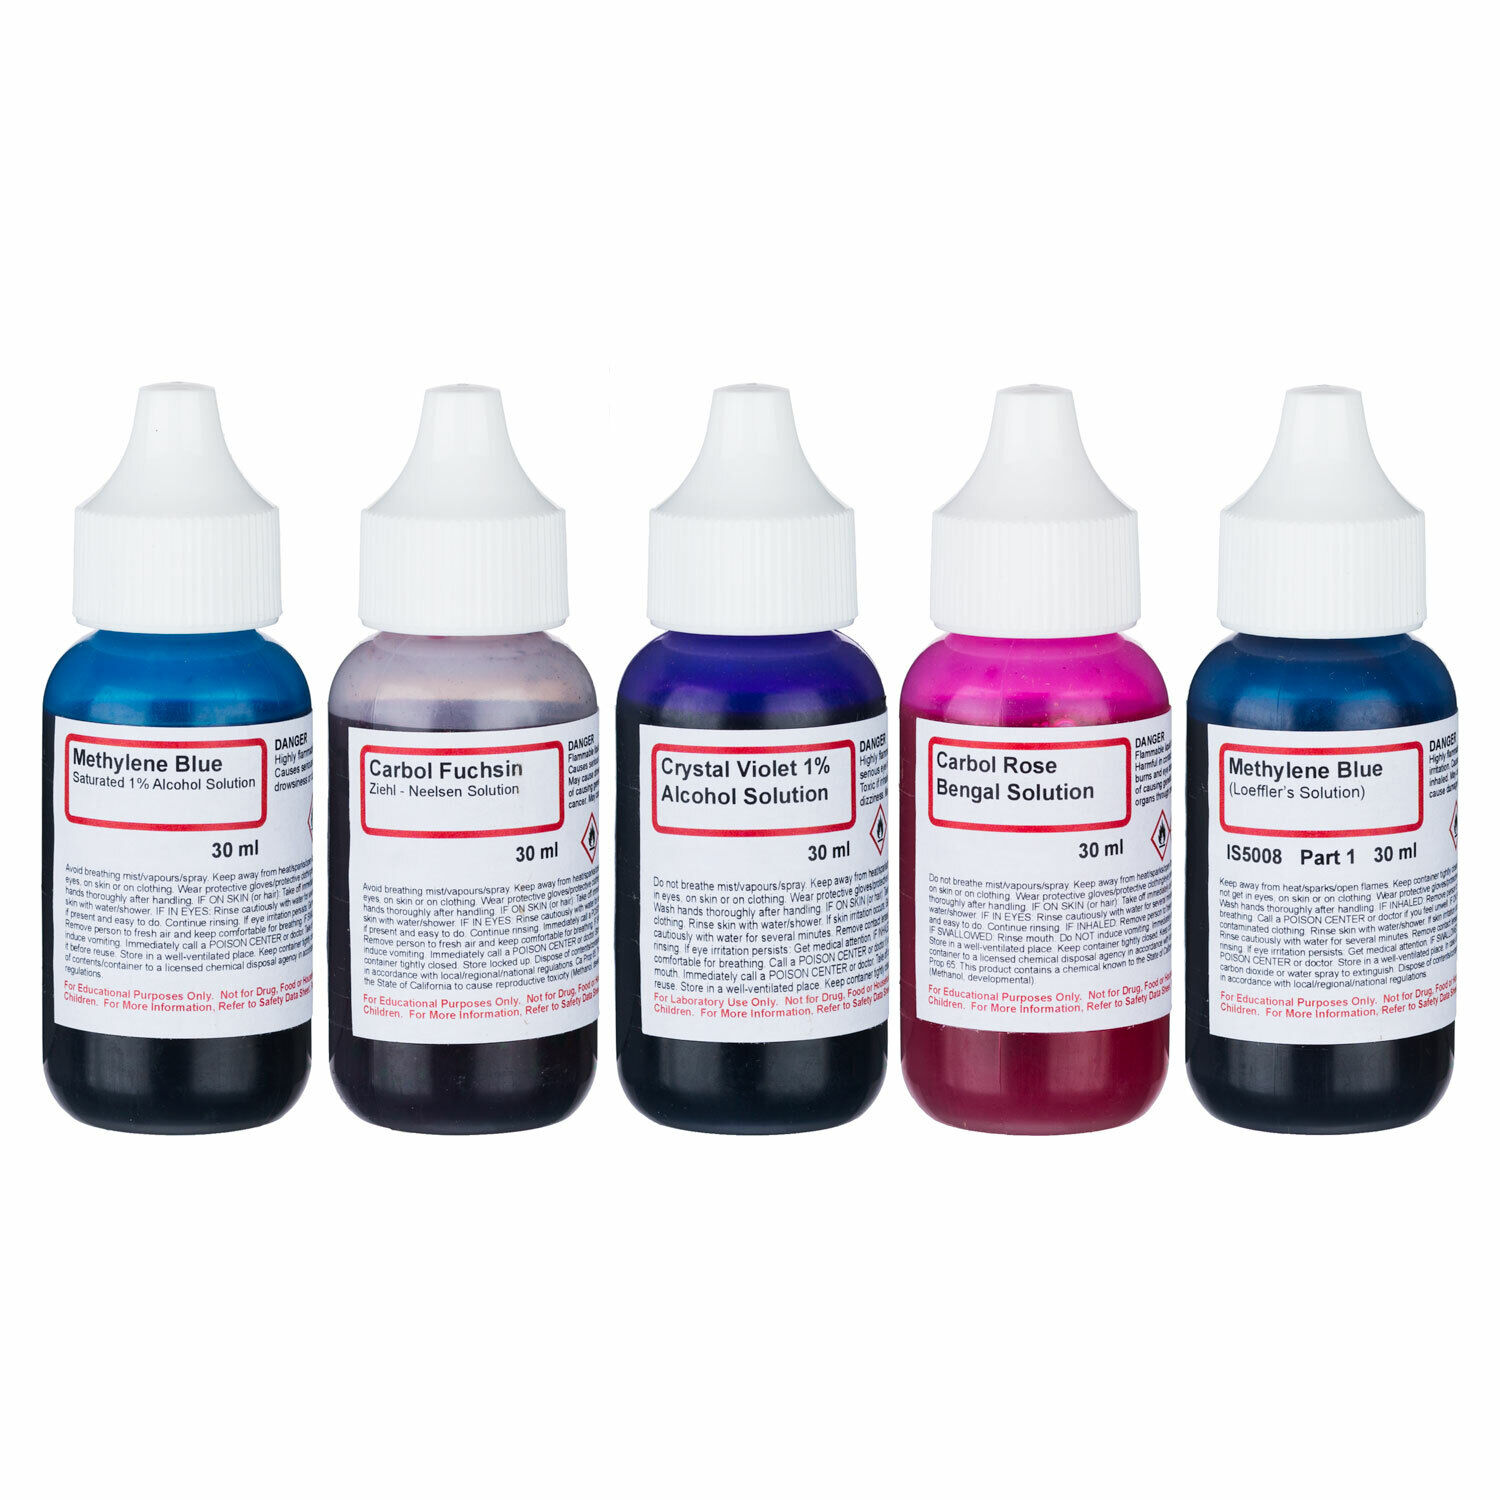 AmScope SK-5 Bacteria Stains Stain Kit - 5 Chemicals 4 Making Microscope Slides